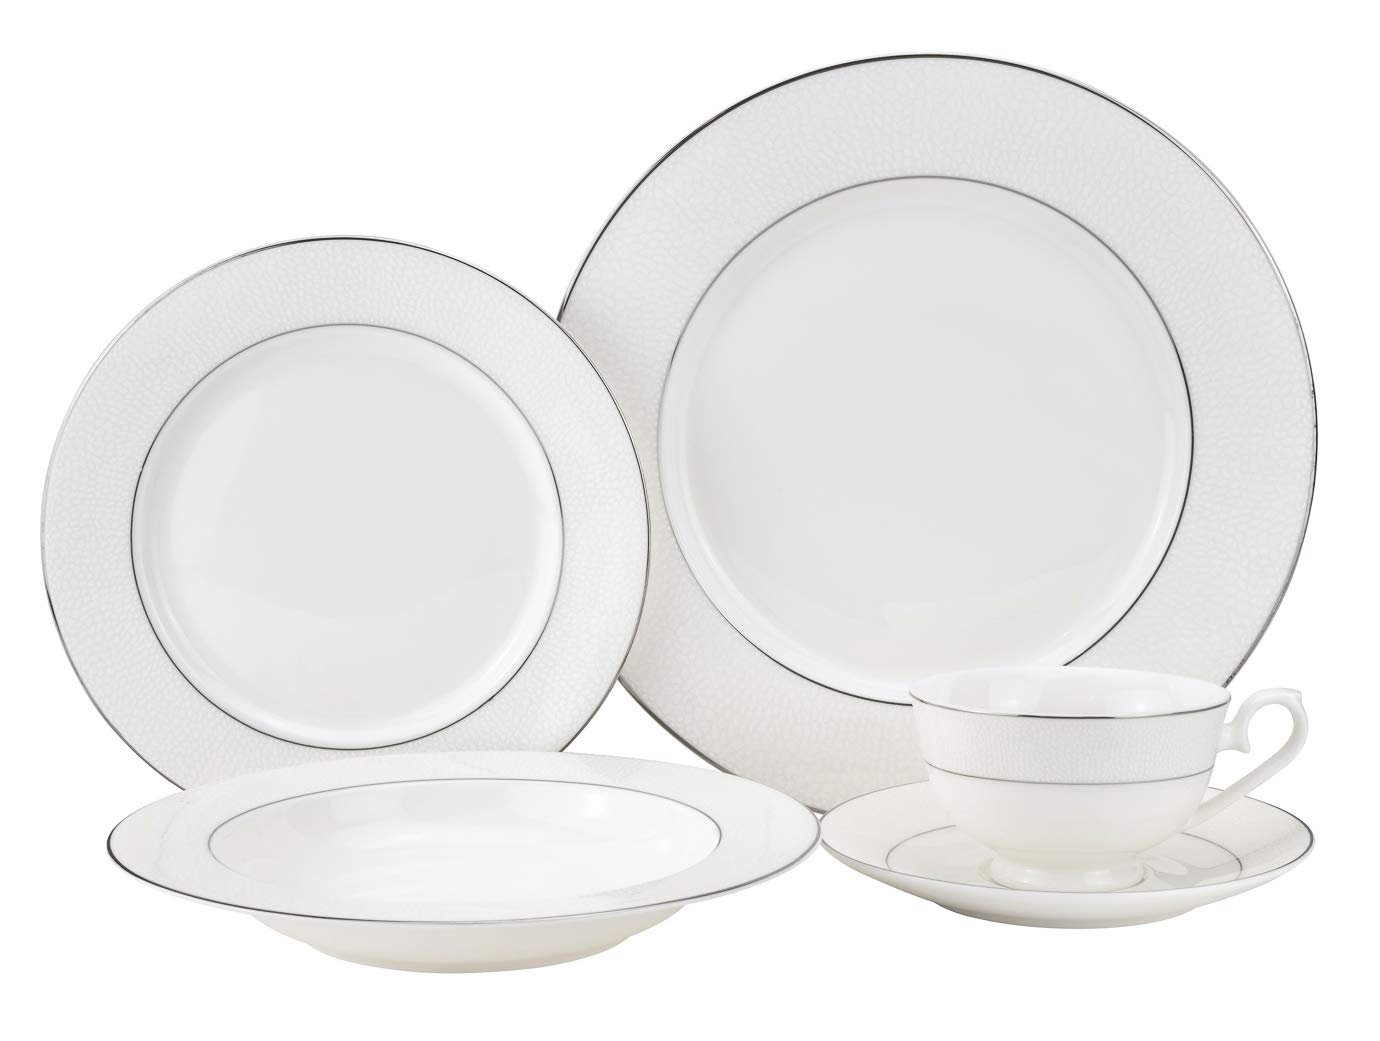 20-pc. Dinner Set Service for 4, 24K Gold-plated Luxury Bone China Tableware ("Maria" 6832P) - image 2 of 3